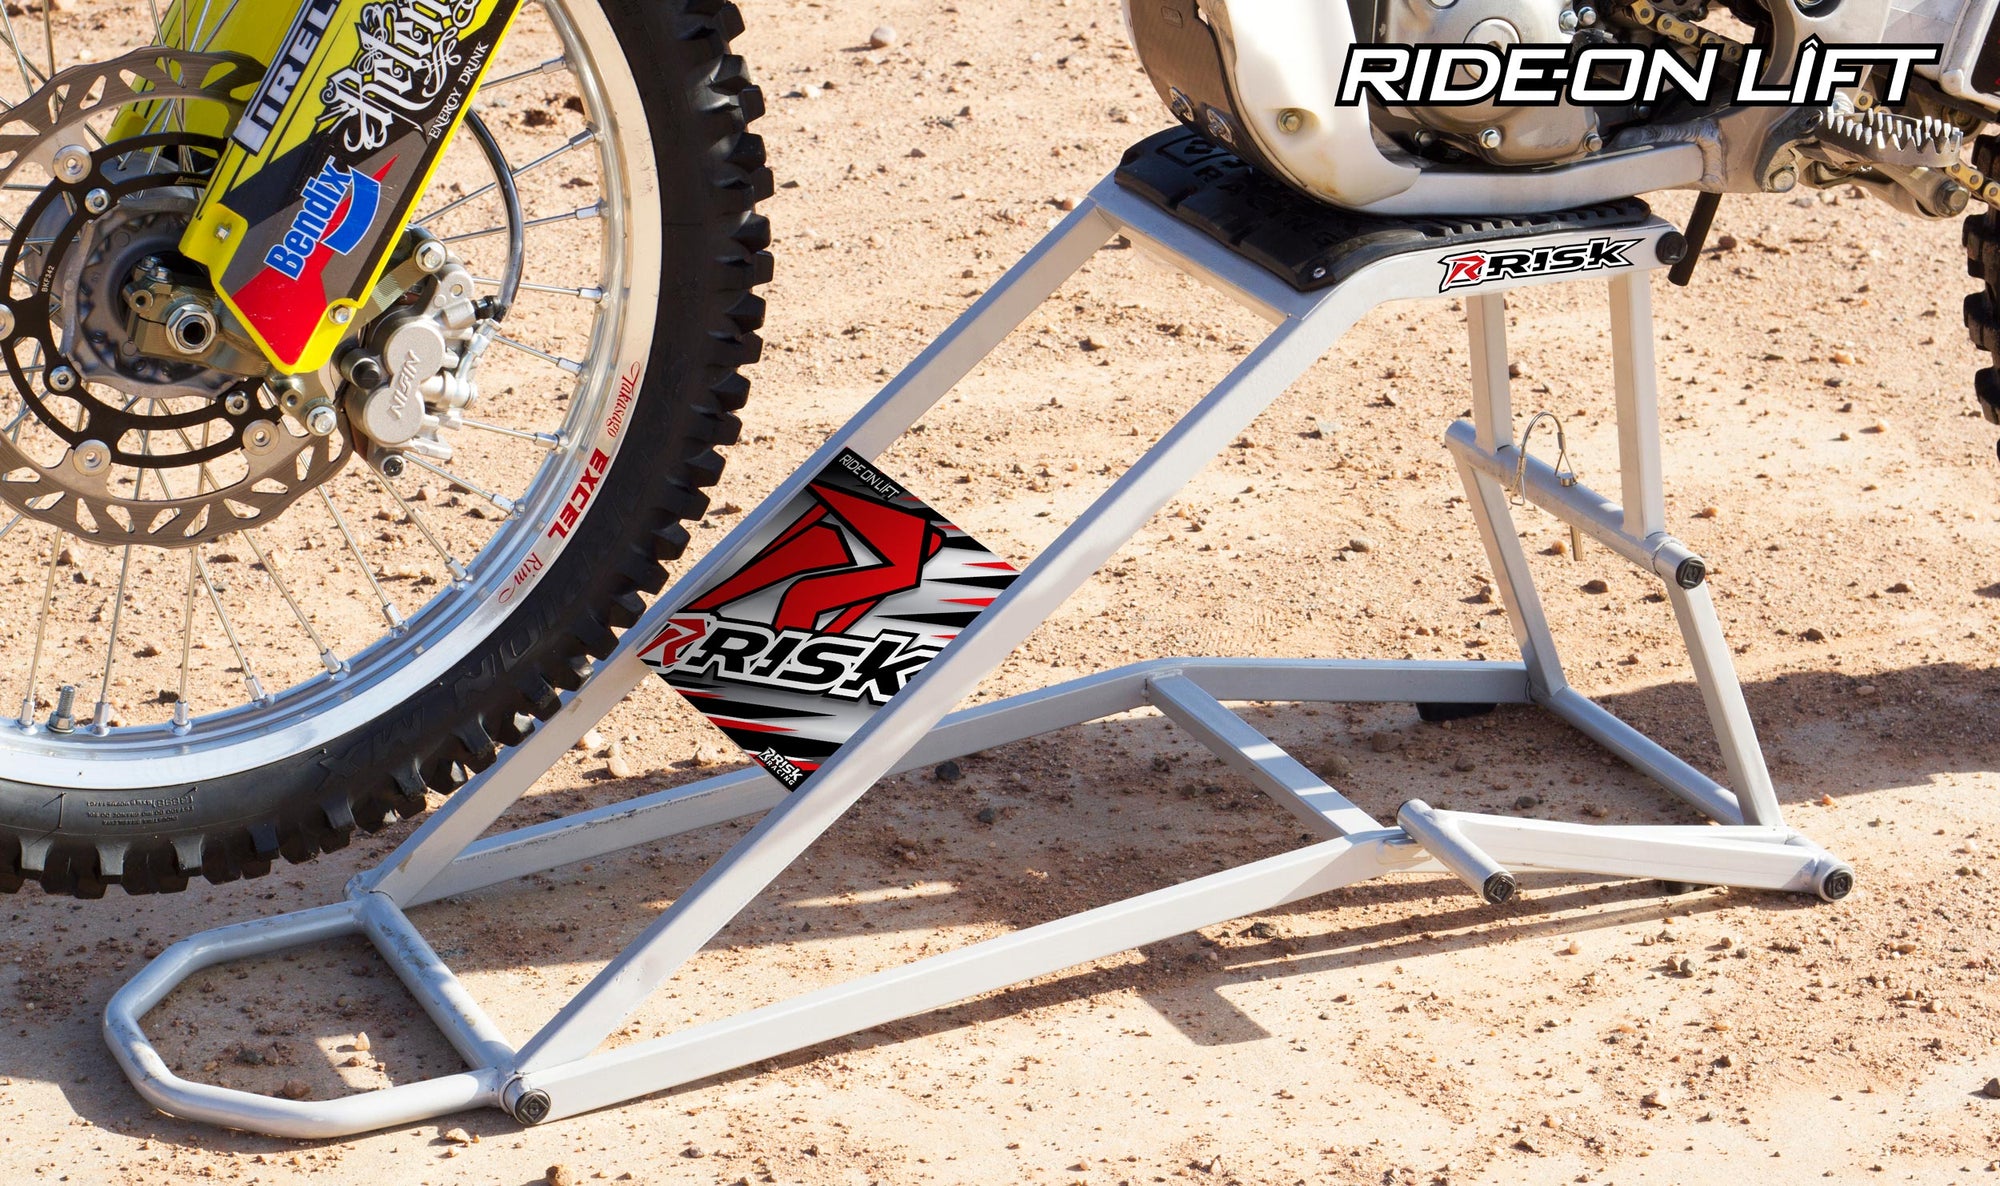 RR1 - Ride-On Lift Motocross/Dirtbike Stand // Risk Racing Europe